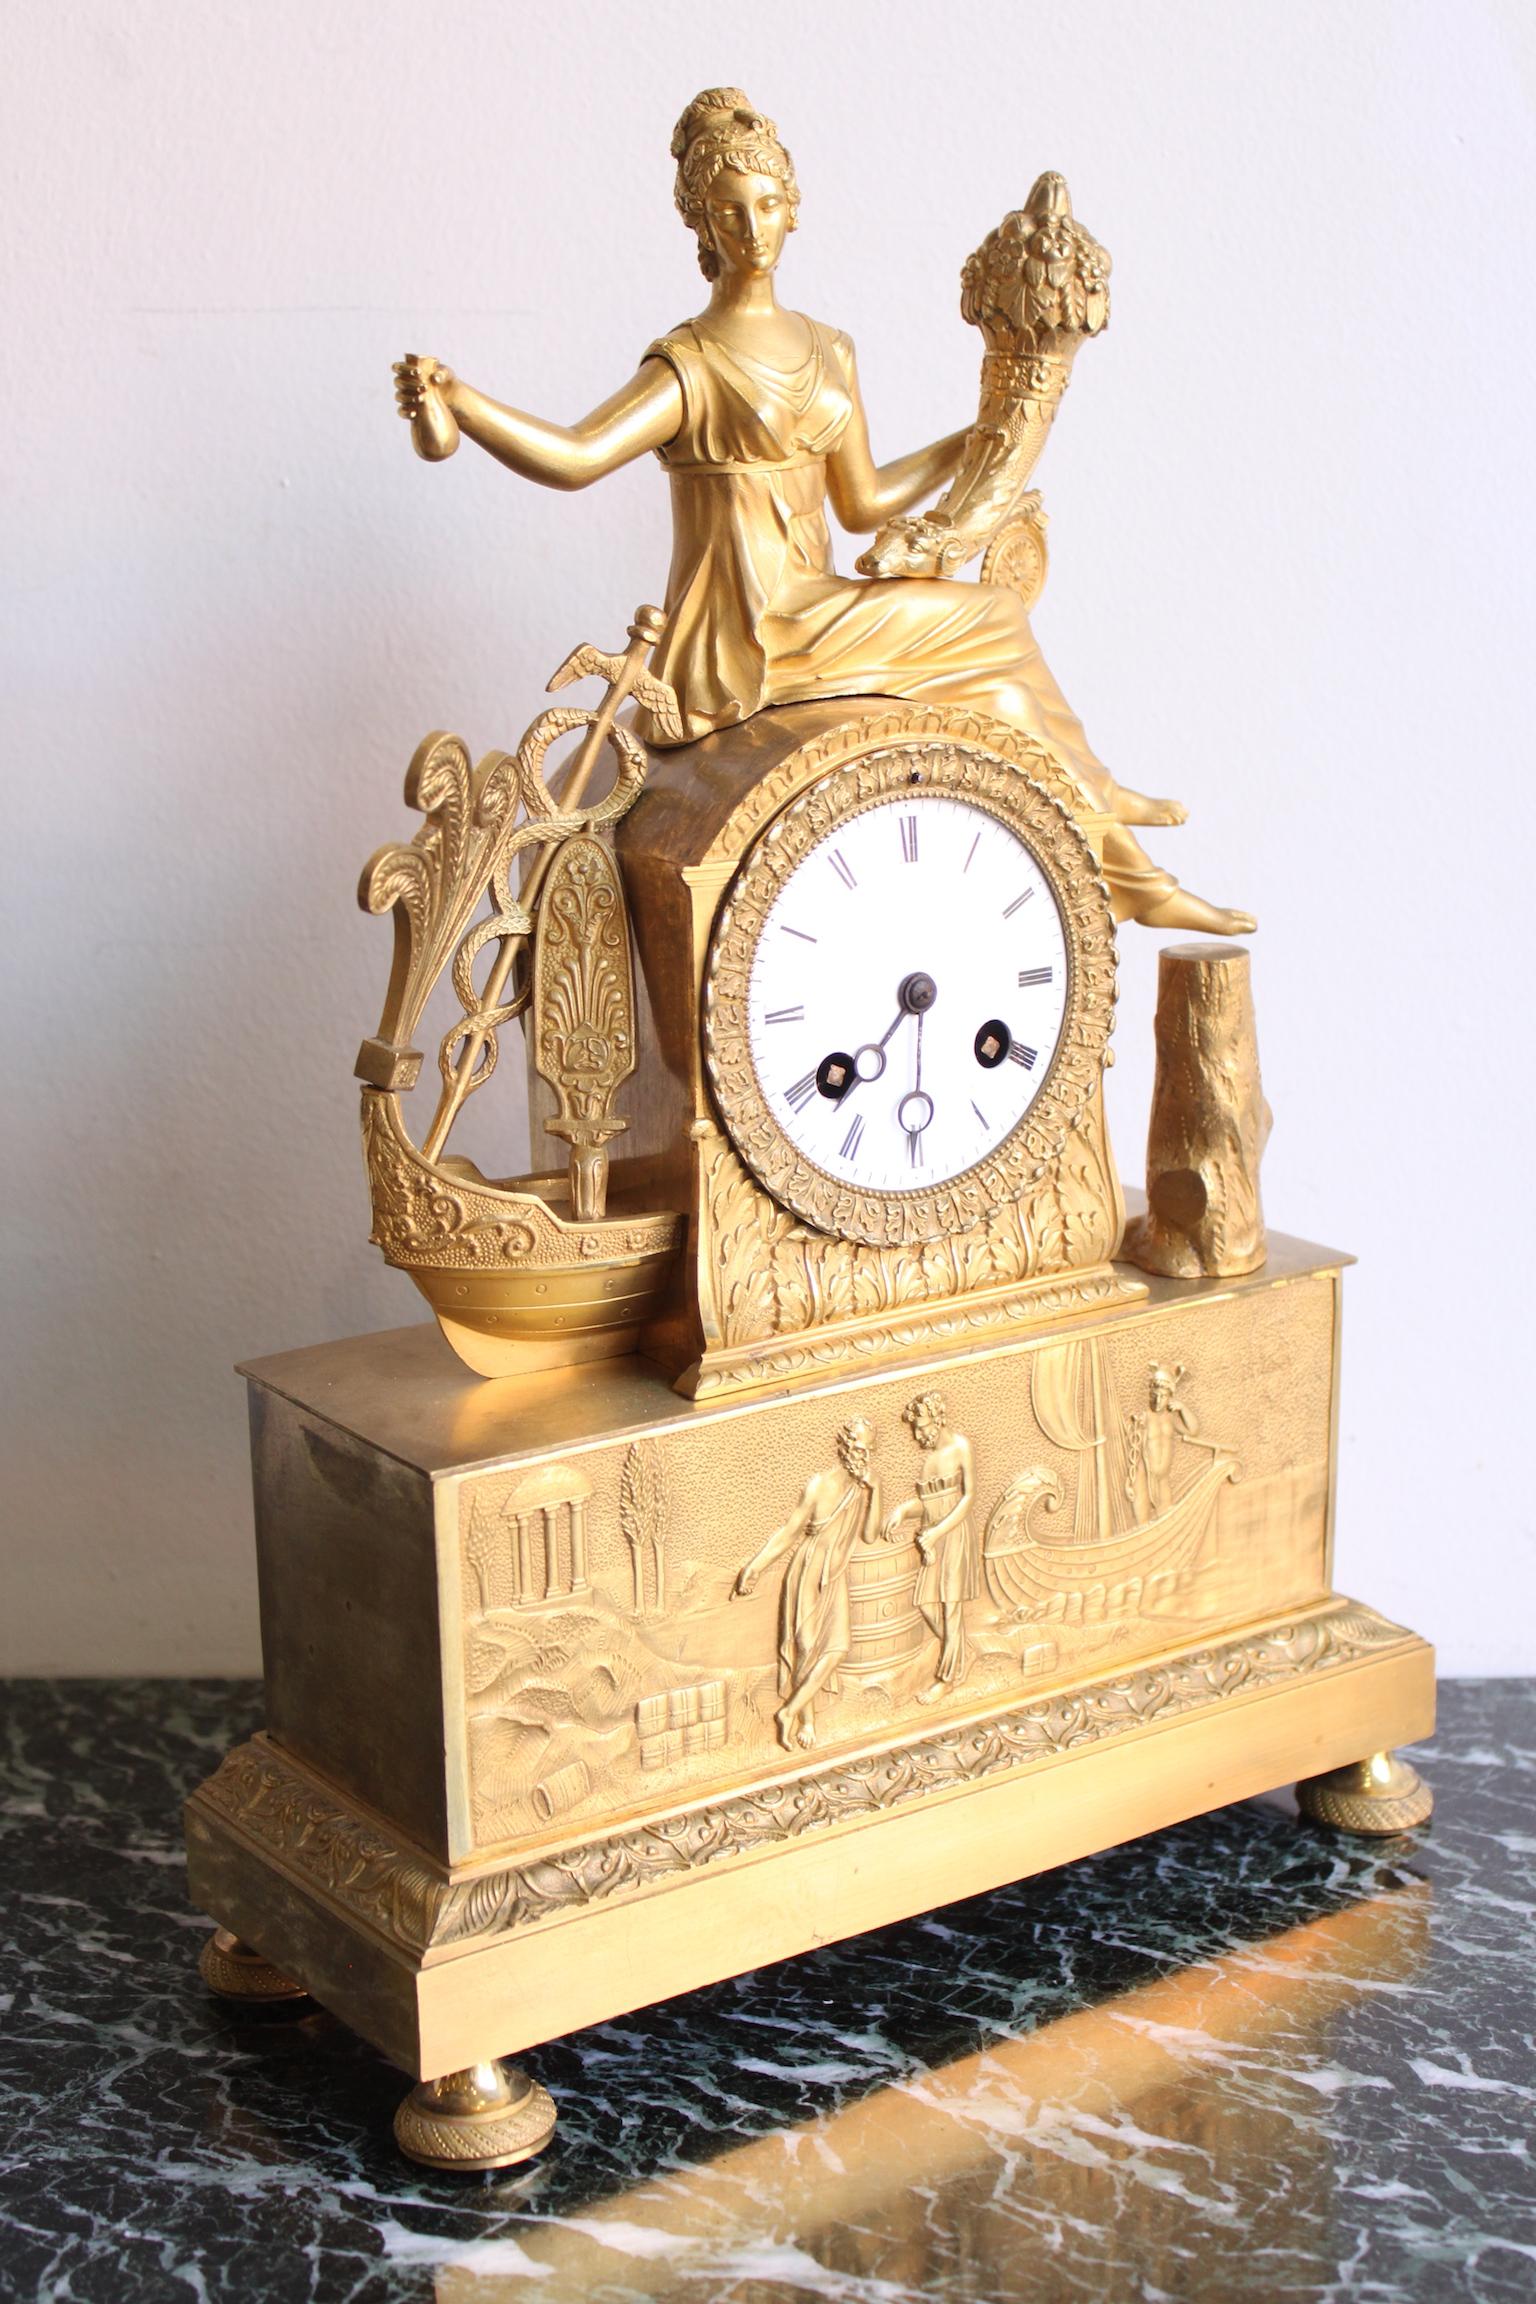 19th century gilt bronze clock representing a woman holding a cornucopia. Complete movement in working order. An adjustment is to be expected.
Dimensions: width 25.5cm, height 38cm, depth 11cm.